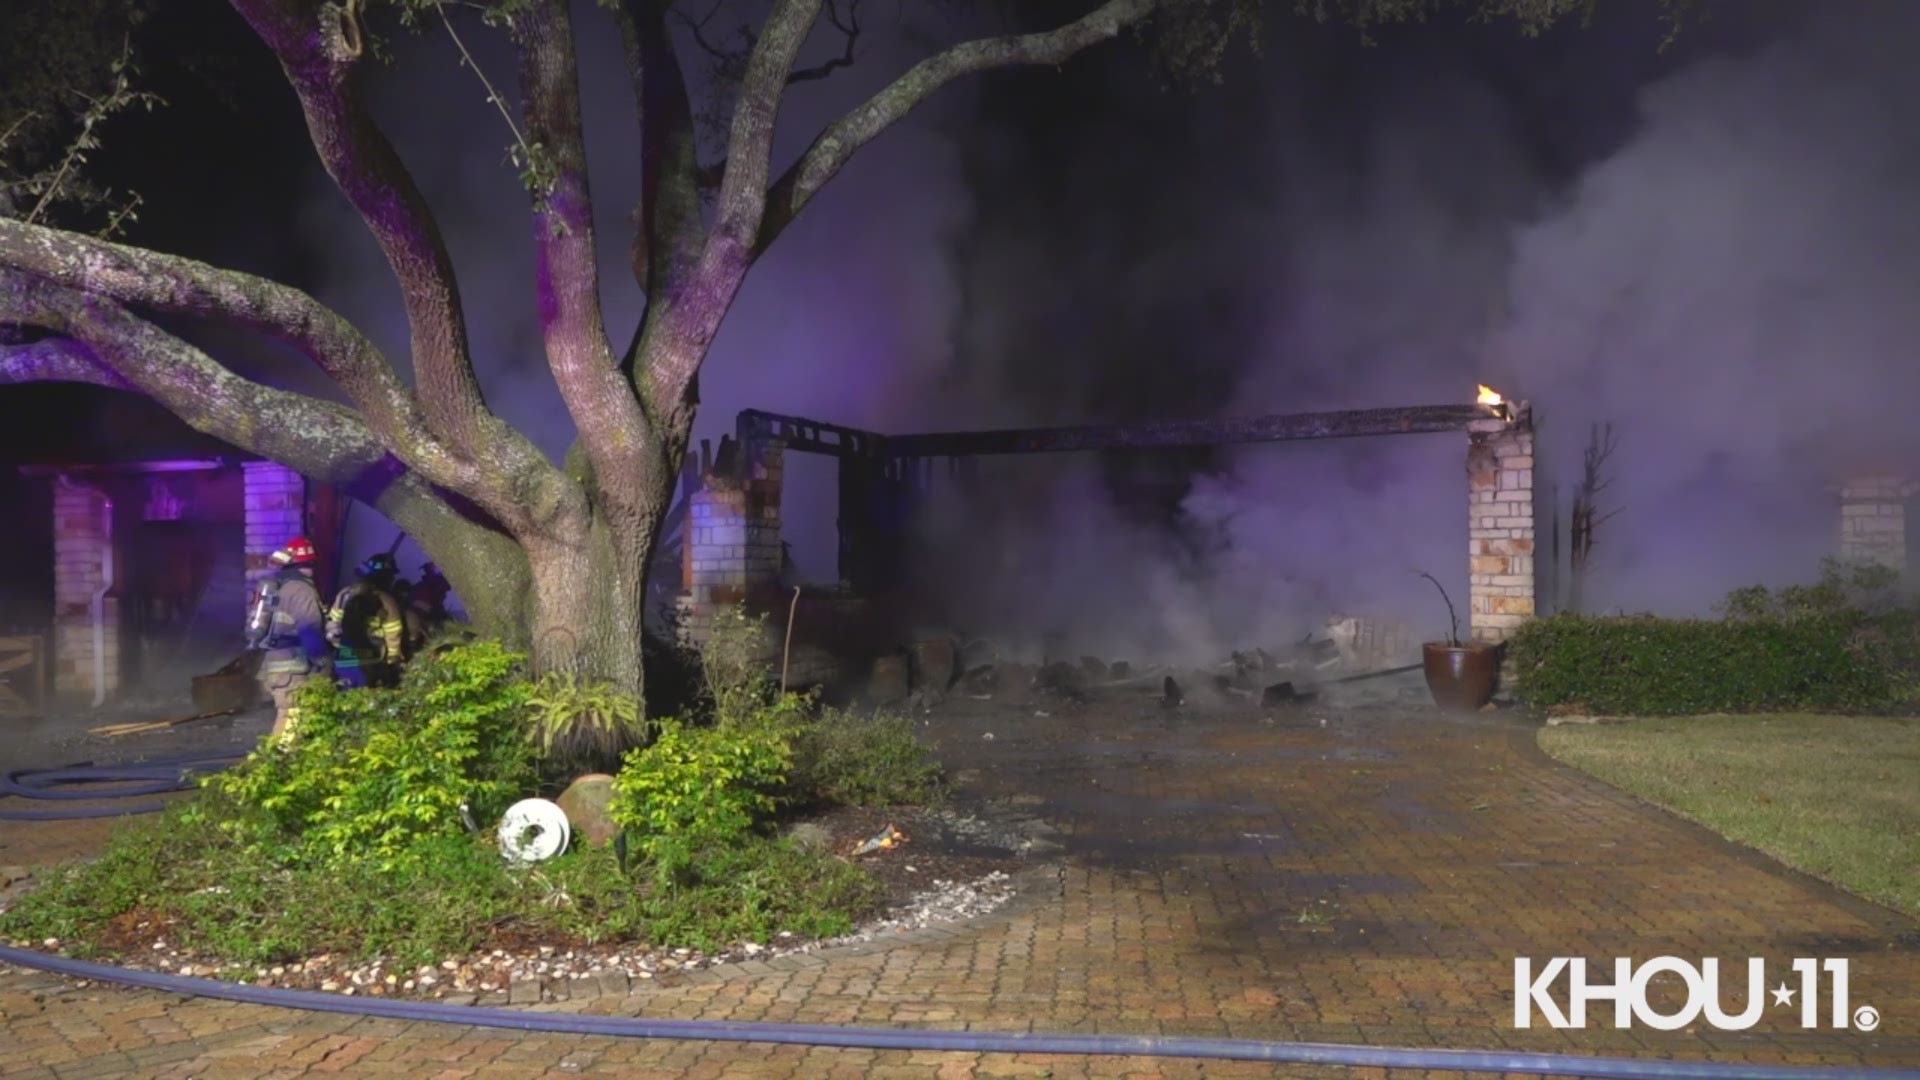 Firefighters are battling a fire at a house fully engulfed in flames in northwest Harris County Friday morning.